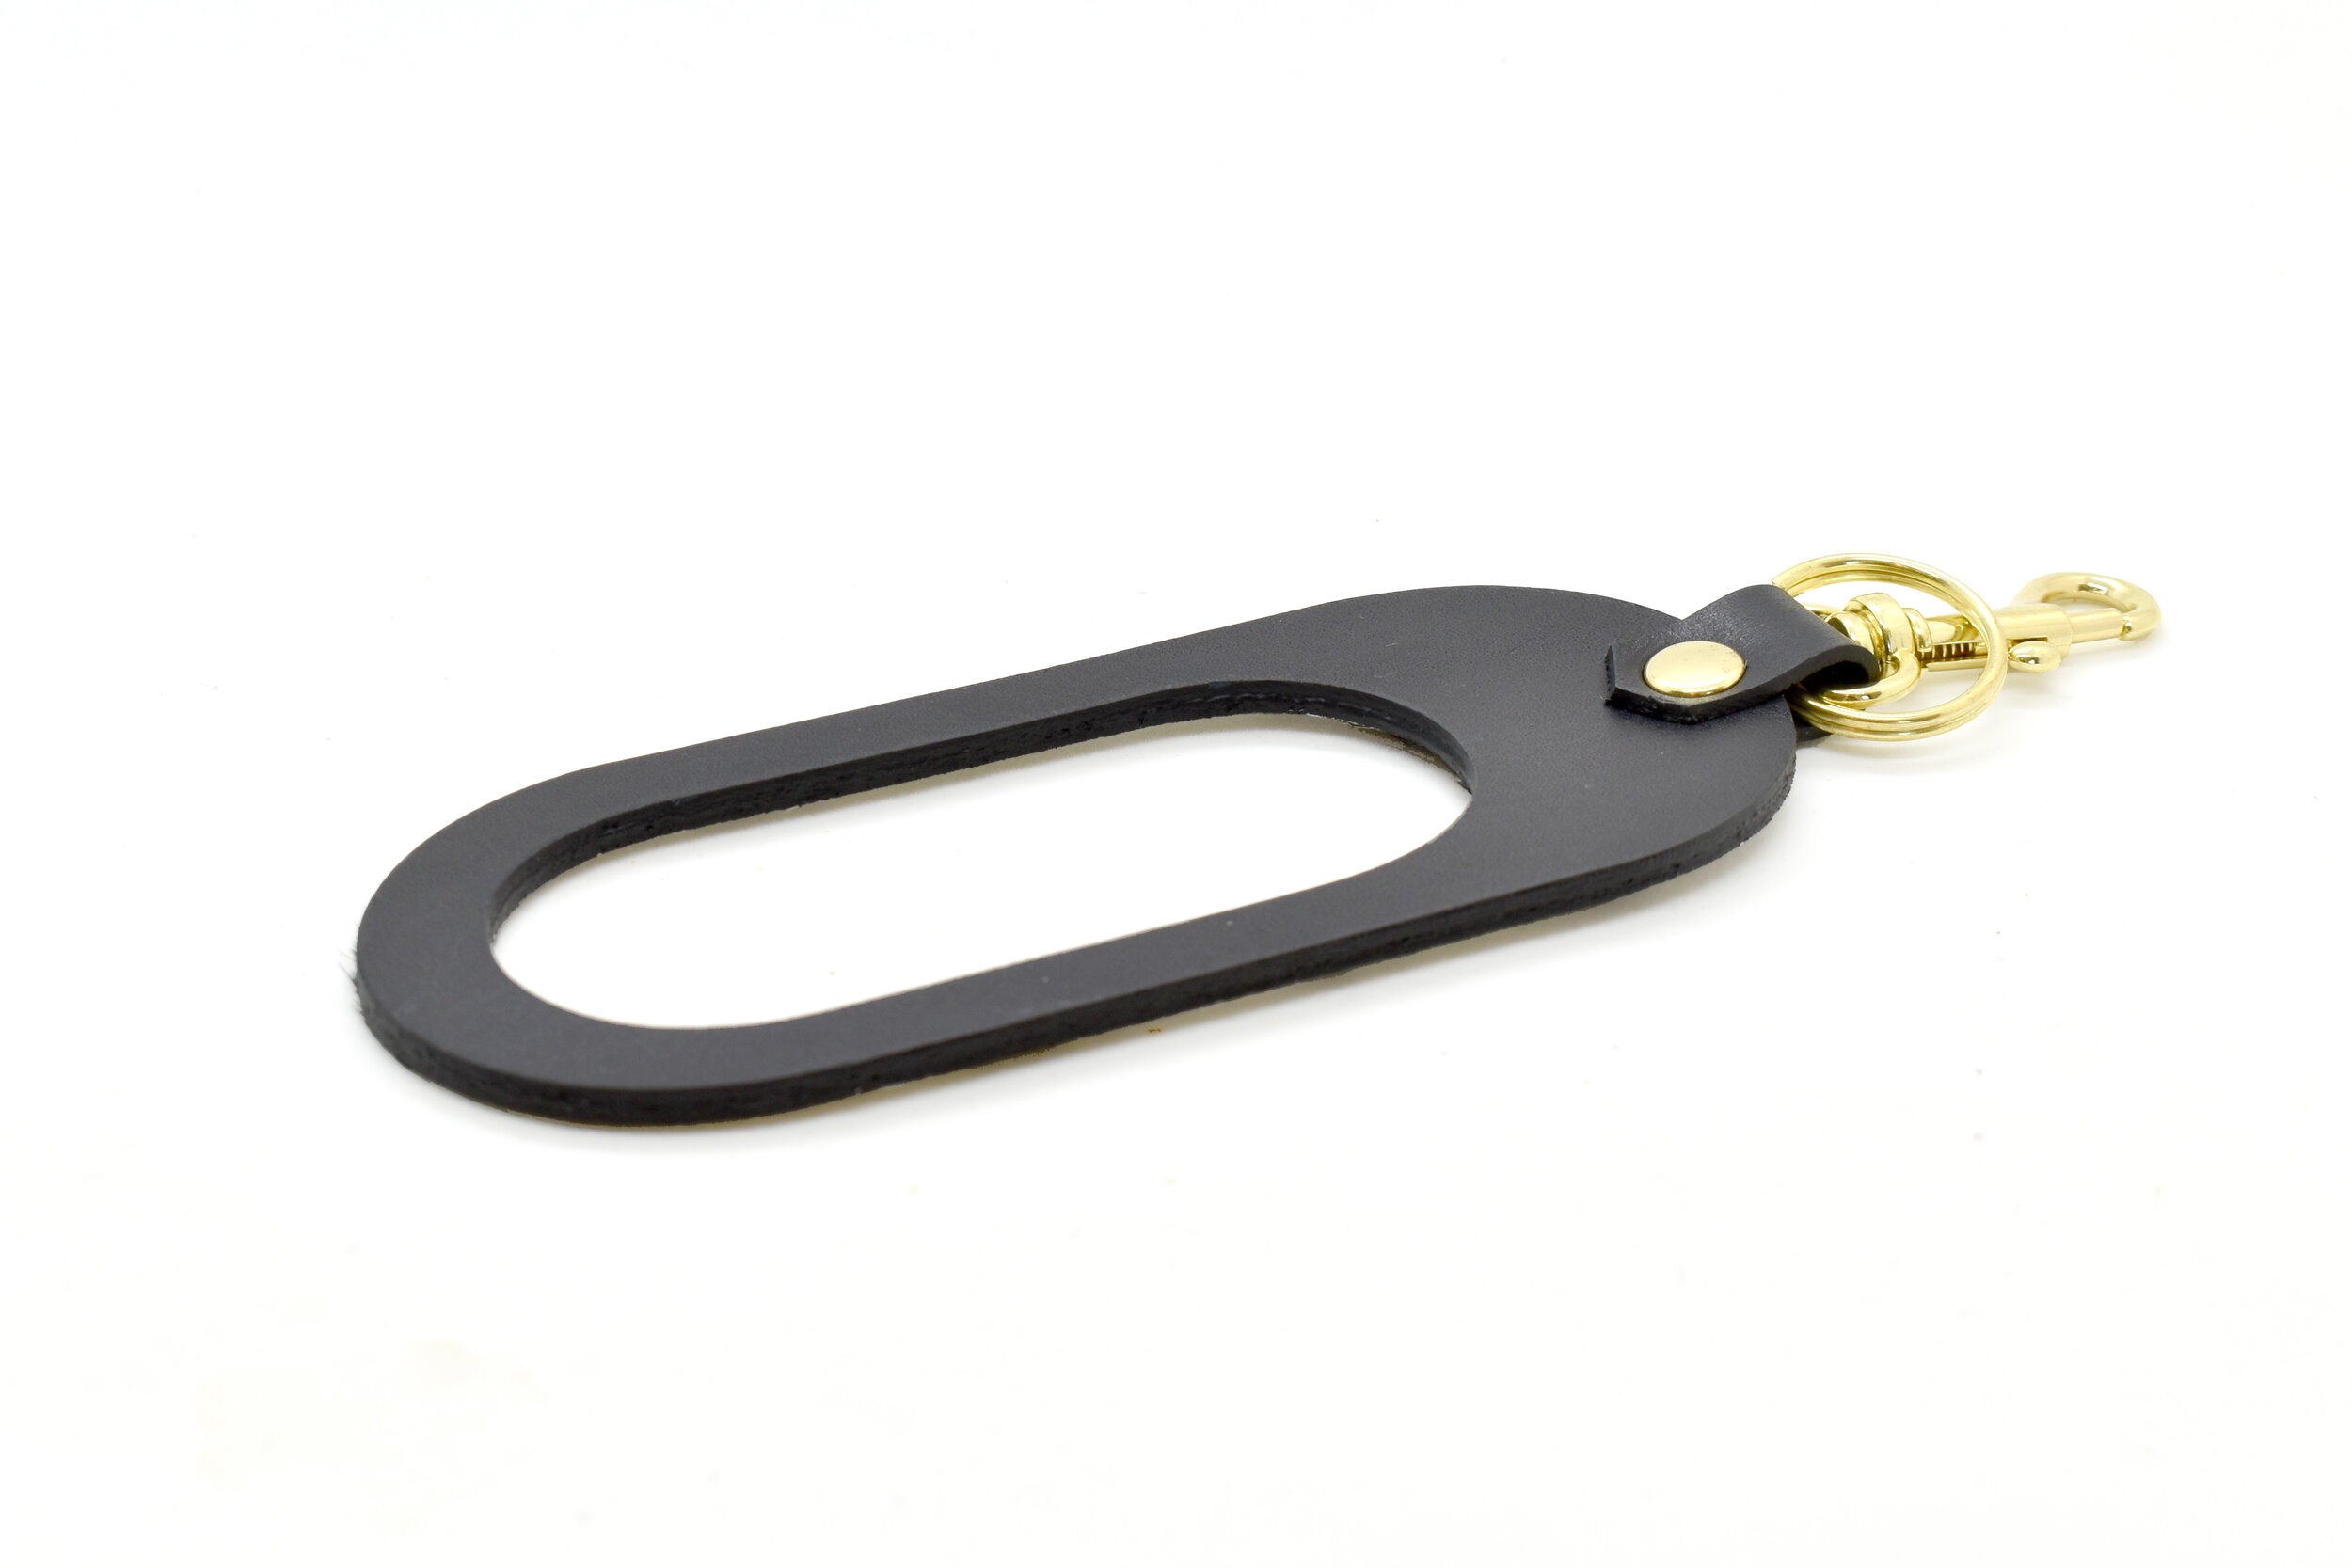 dual colored leather cut out key chain hand strap with gold keyring and spring clasp